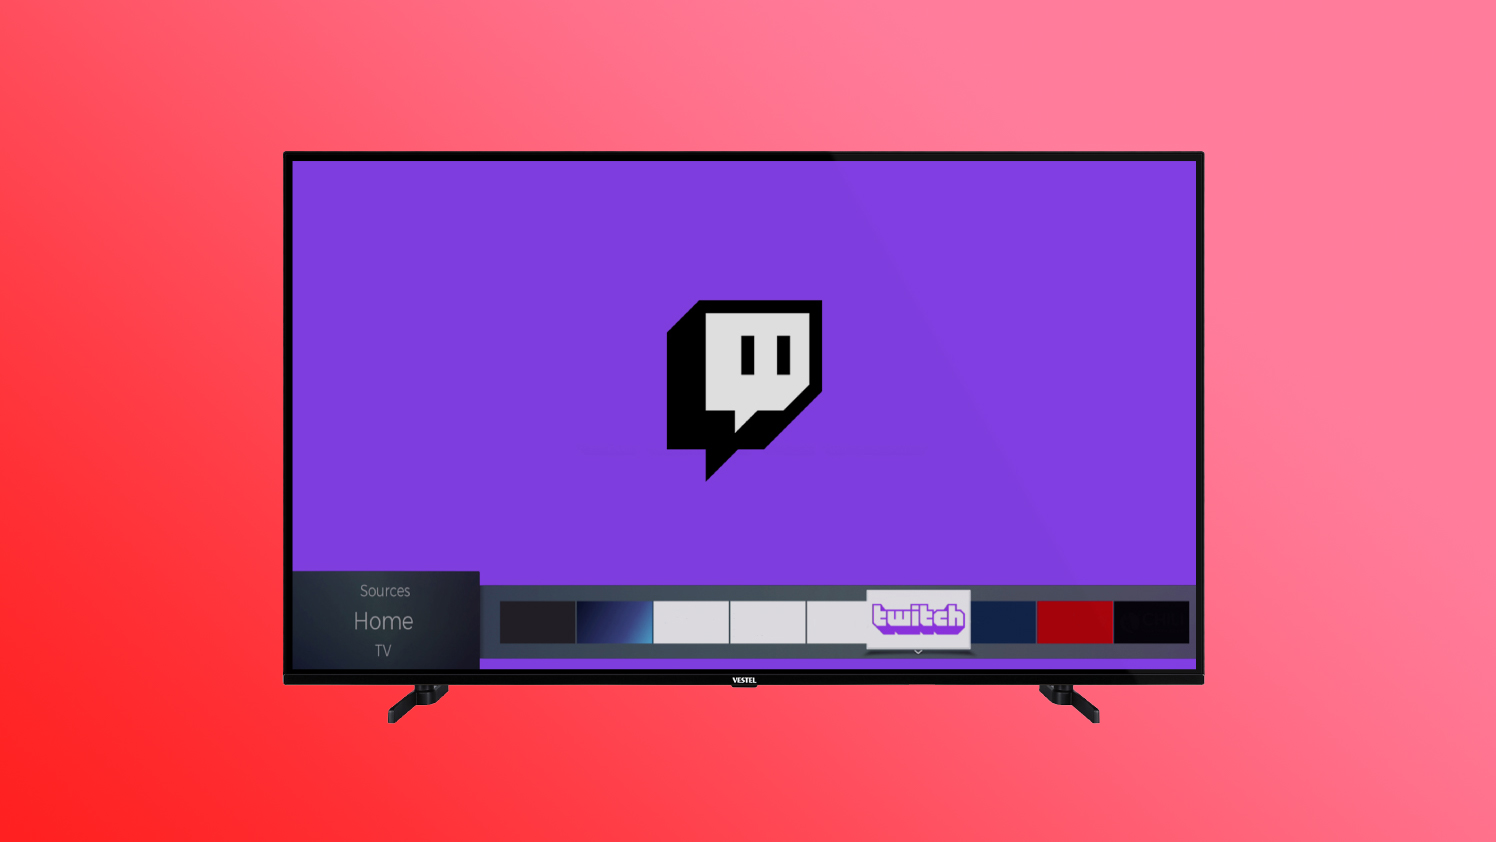 Twitch app is finally coming to more 4K TVs, not just LG